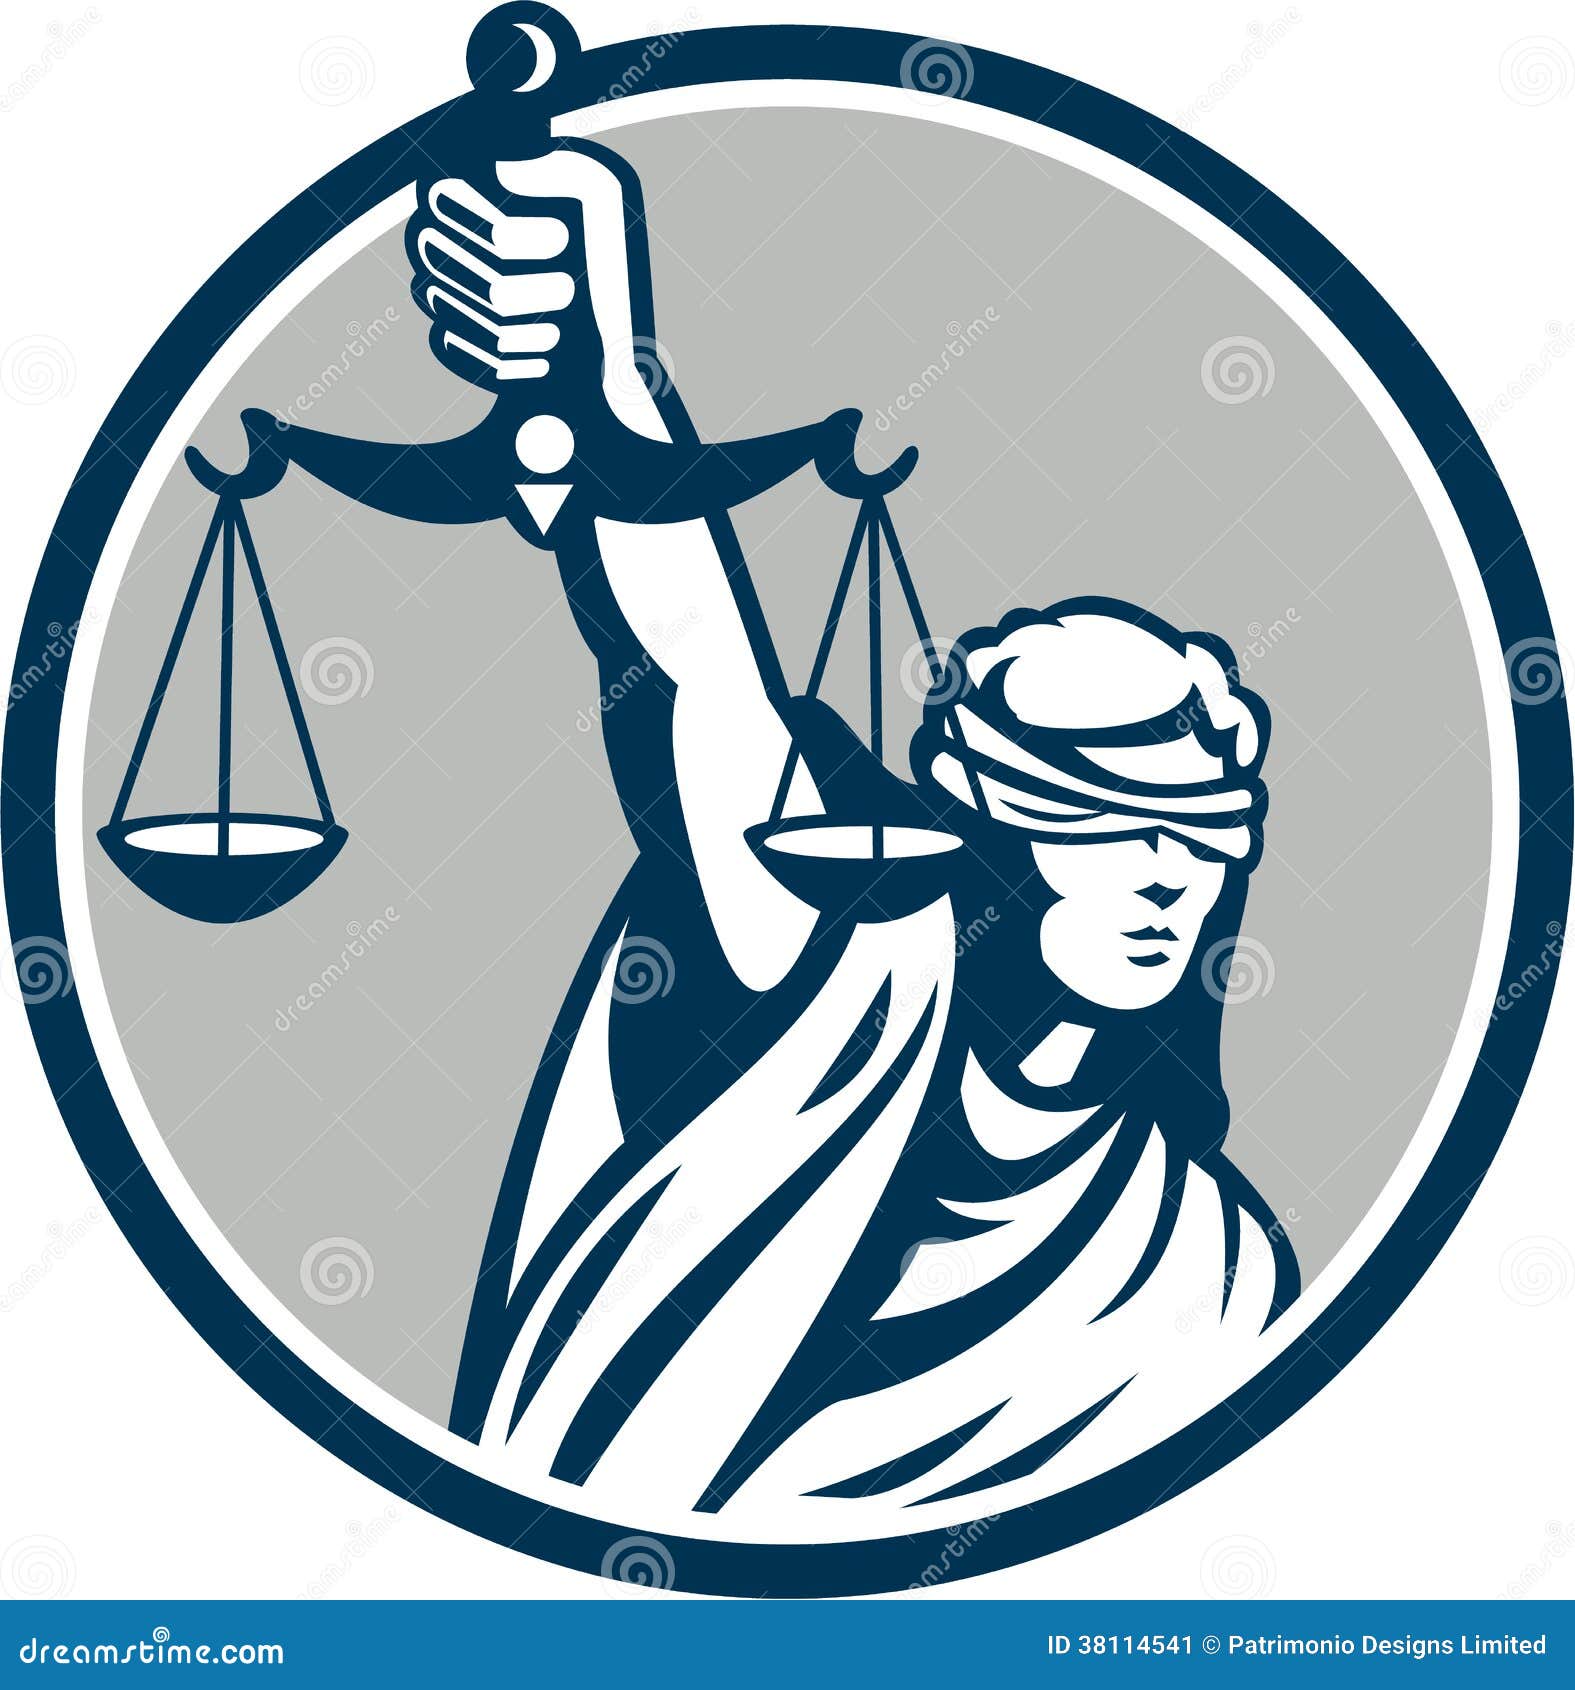 lady blindfolded holding scales justice front retro